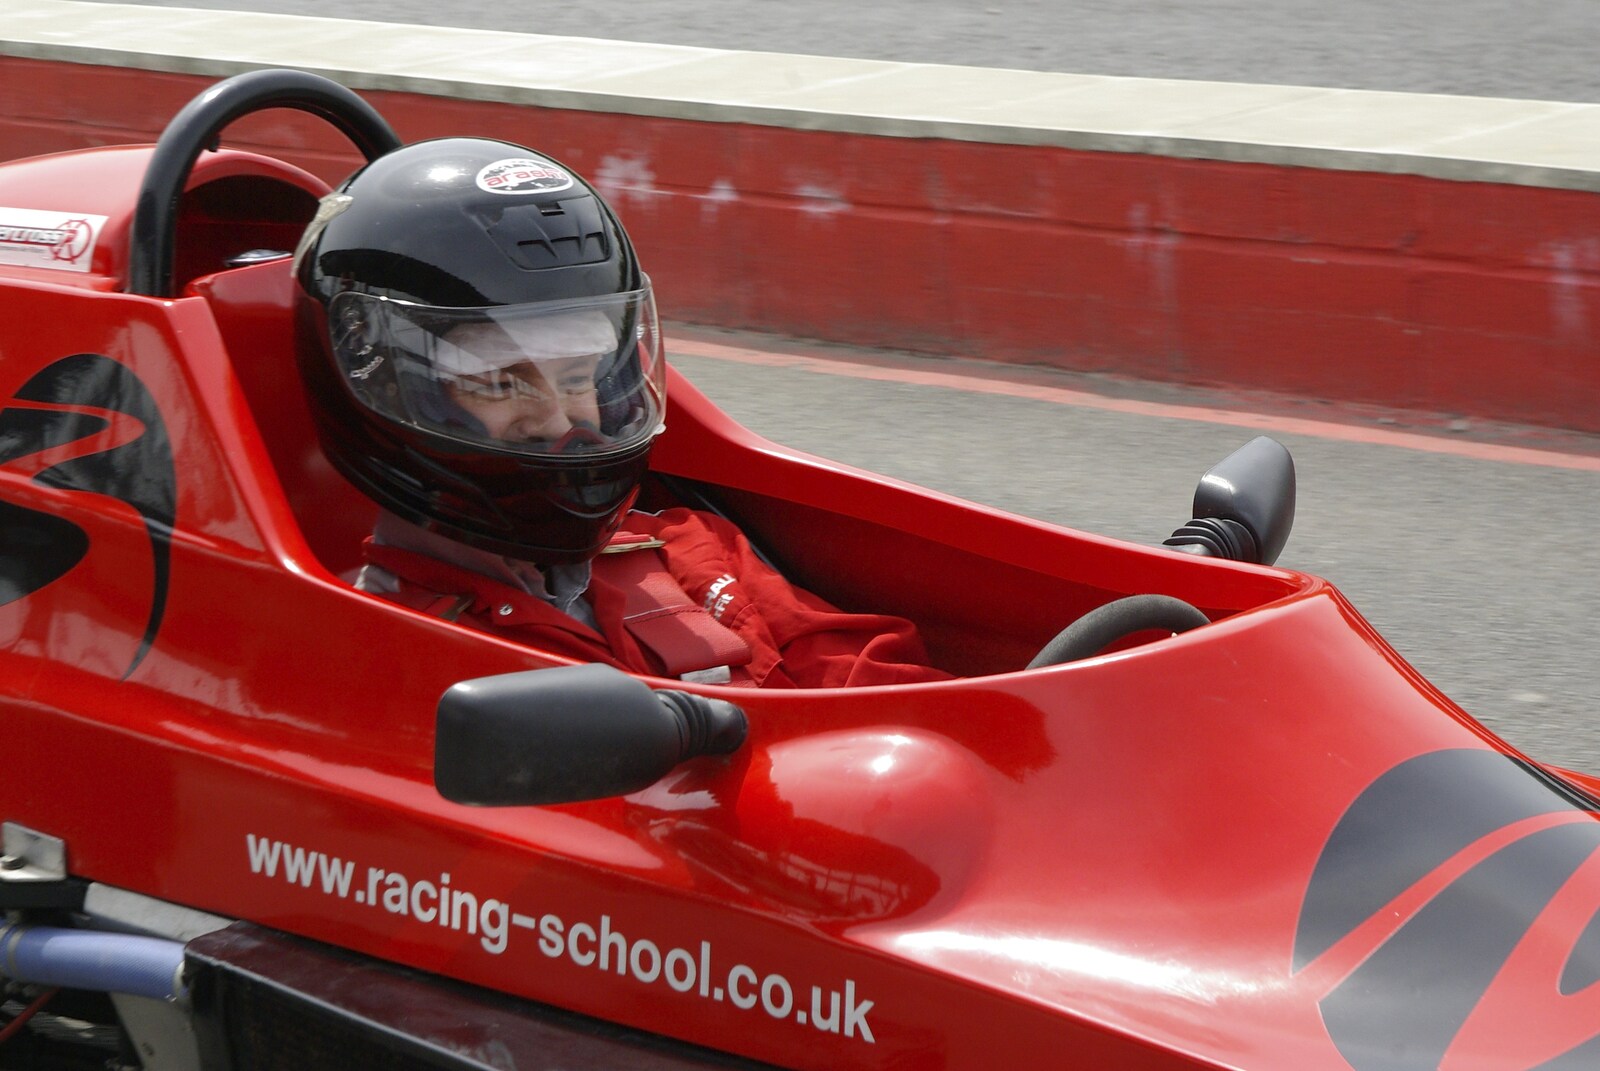 Driving a Racing Car, Three Sisters Racetrack, Wigan, Lancashire - 24th June 2008: In the cokpit of a Formula Ford